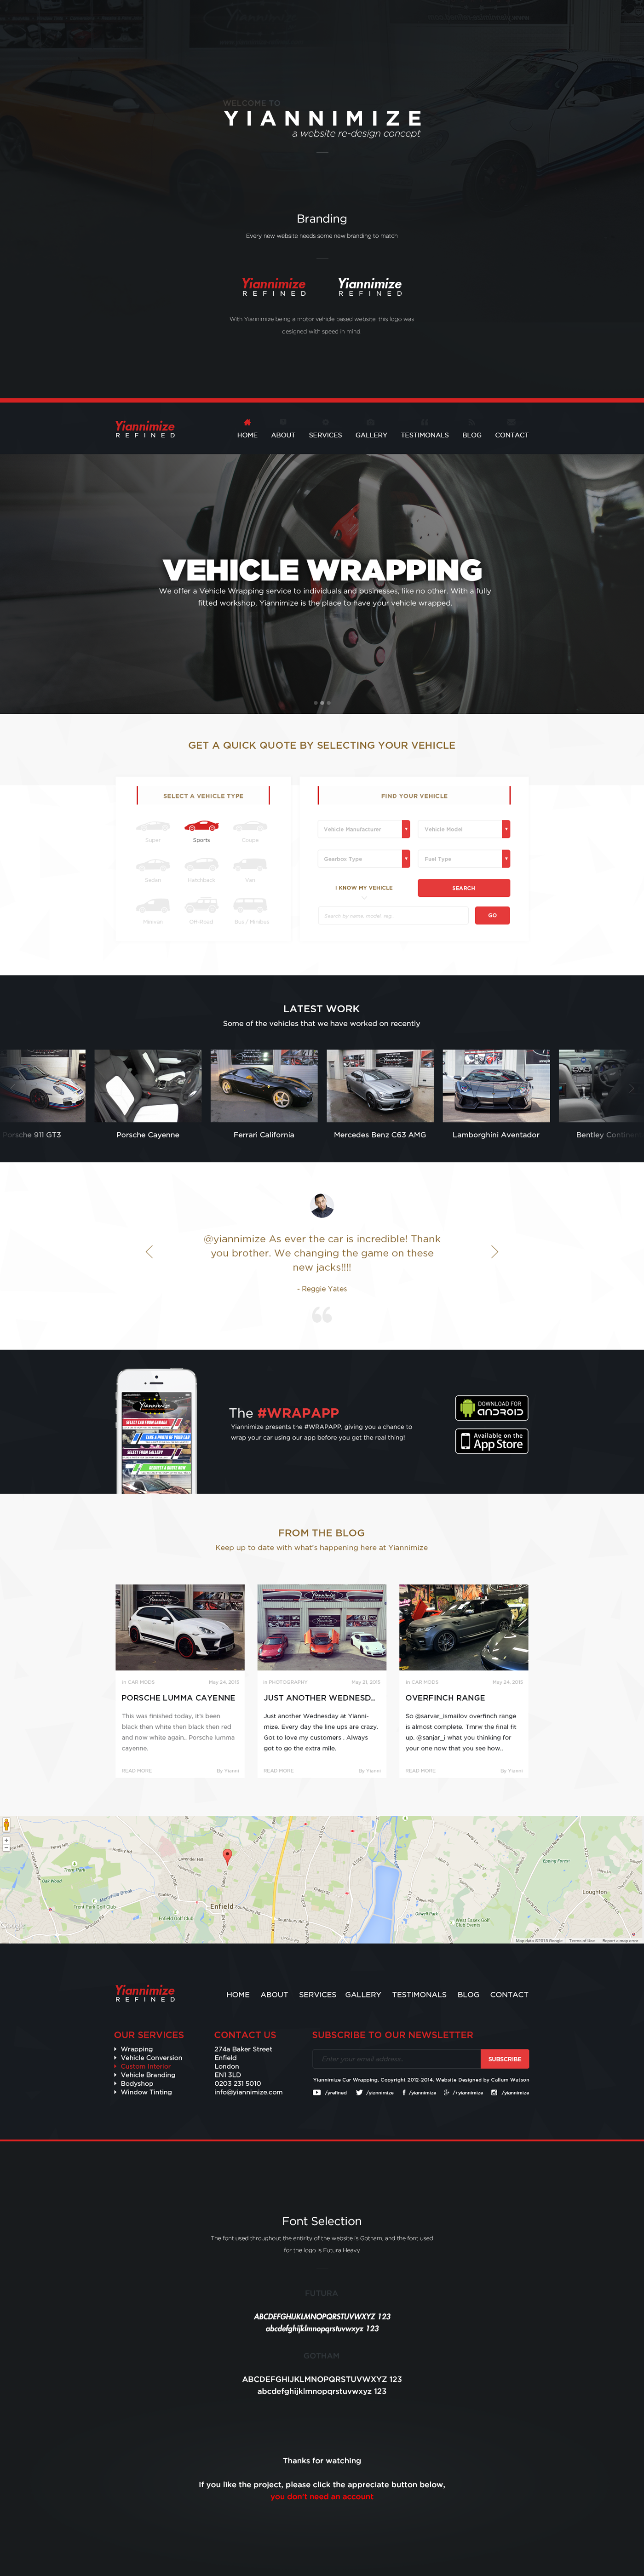 yiannimize car wrapping modification Website Design psd concept yiannimize refined free design Website youtuber   modding